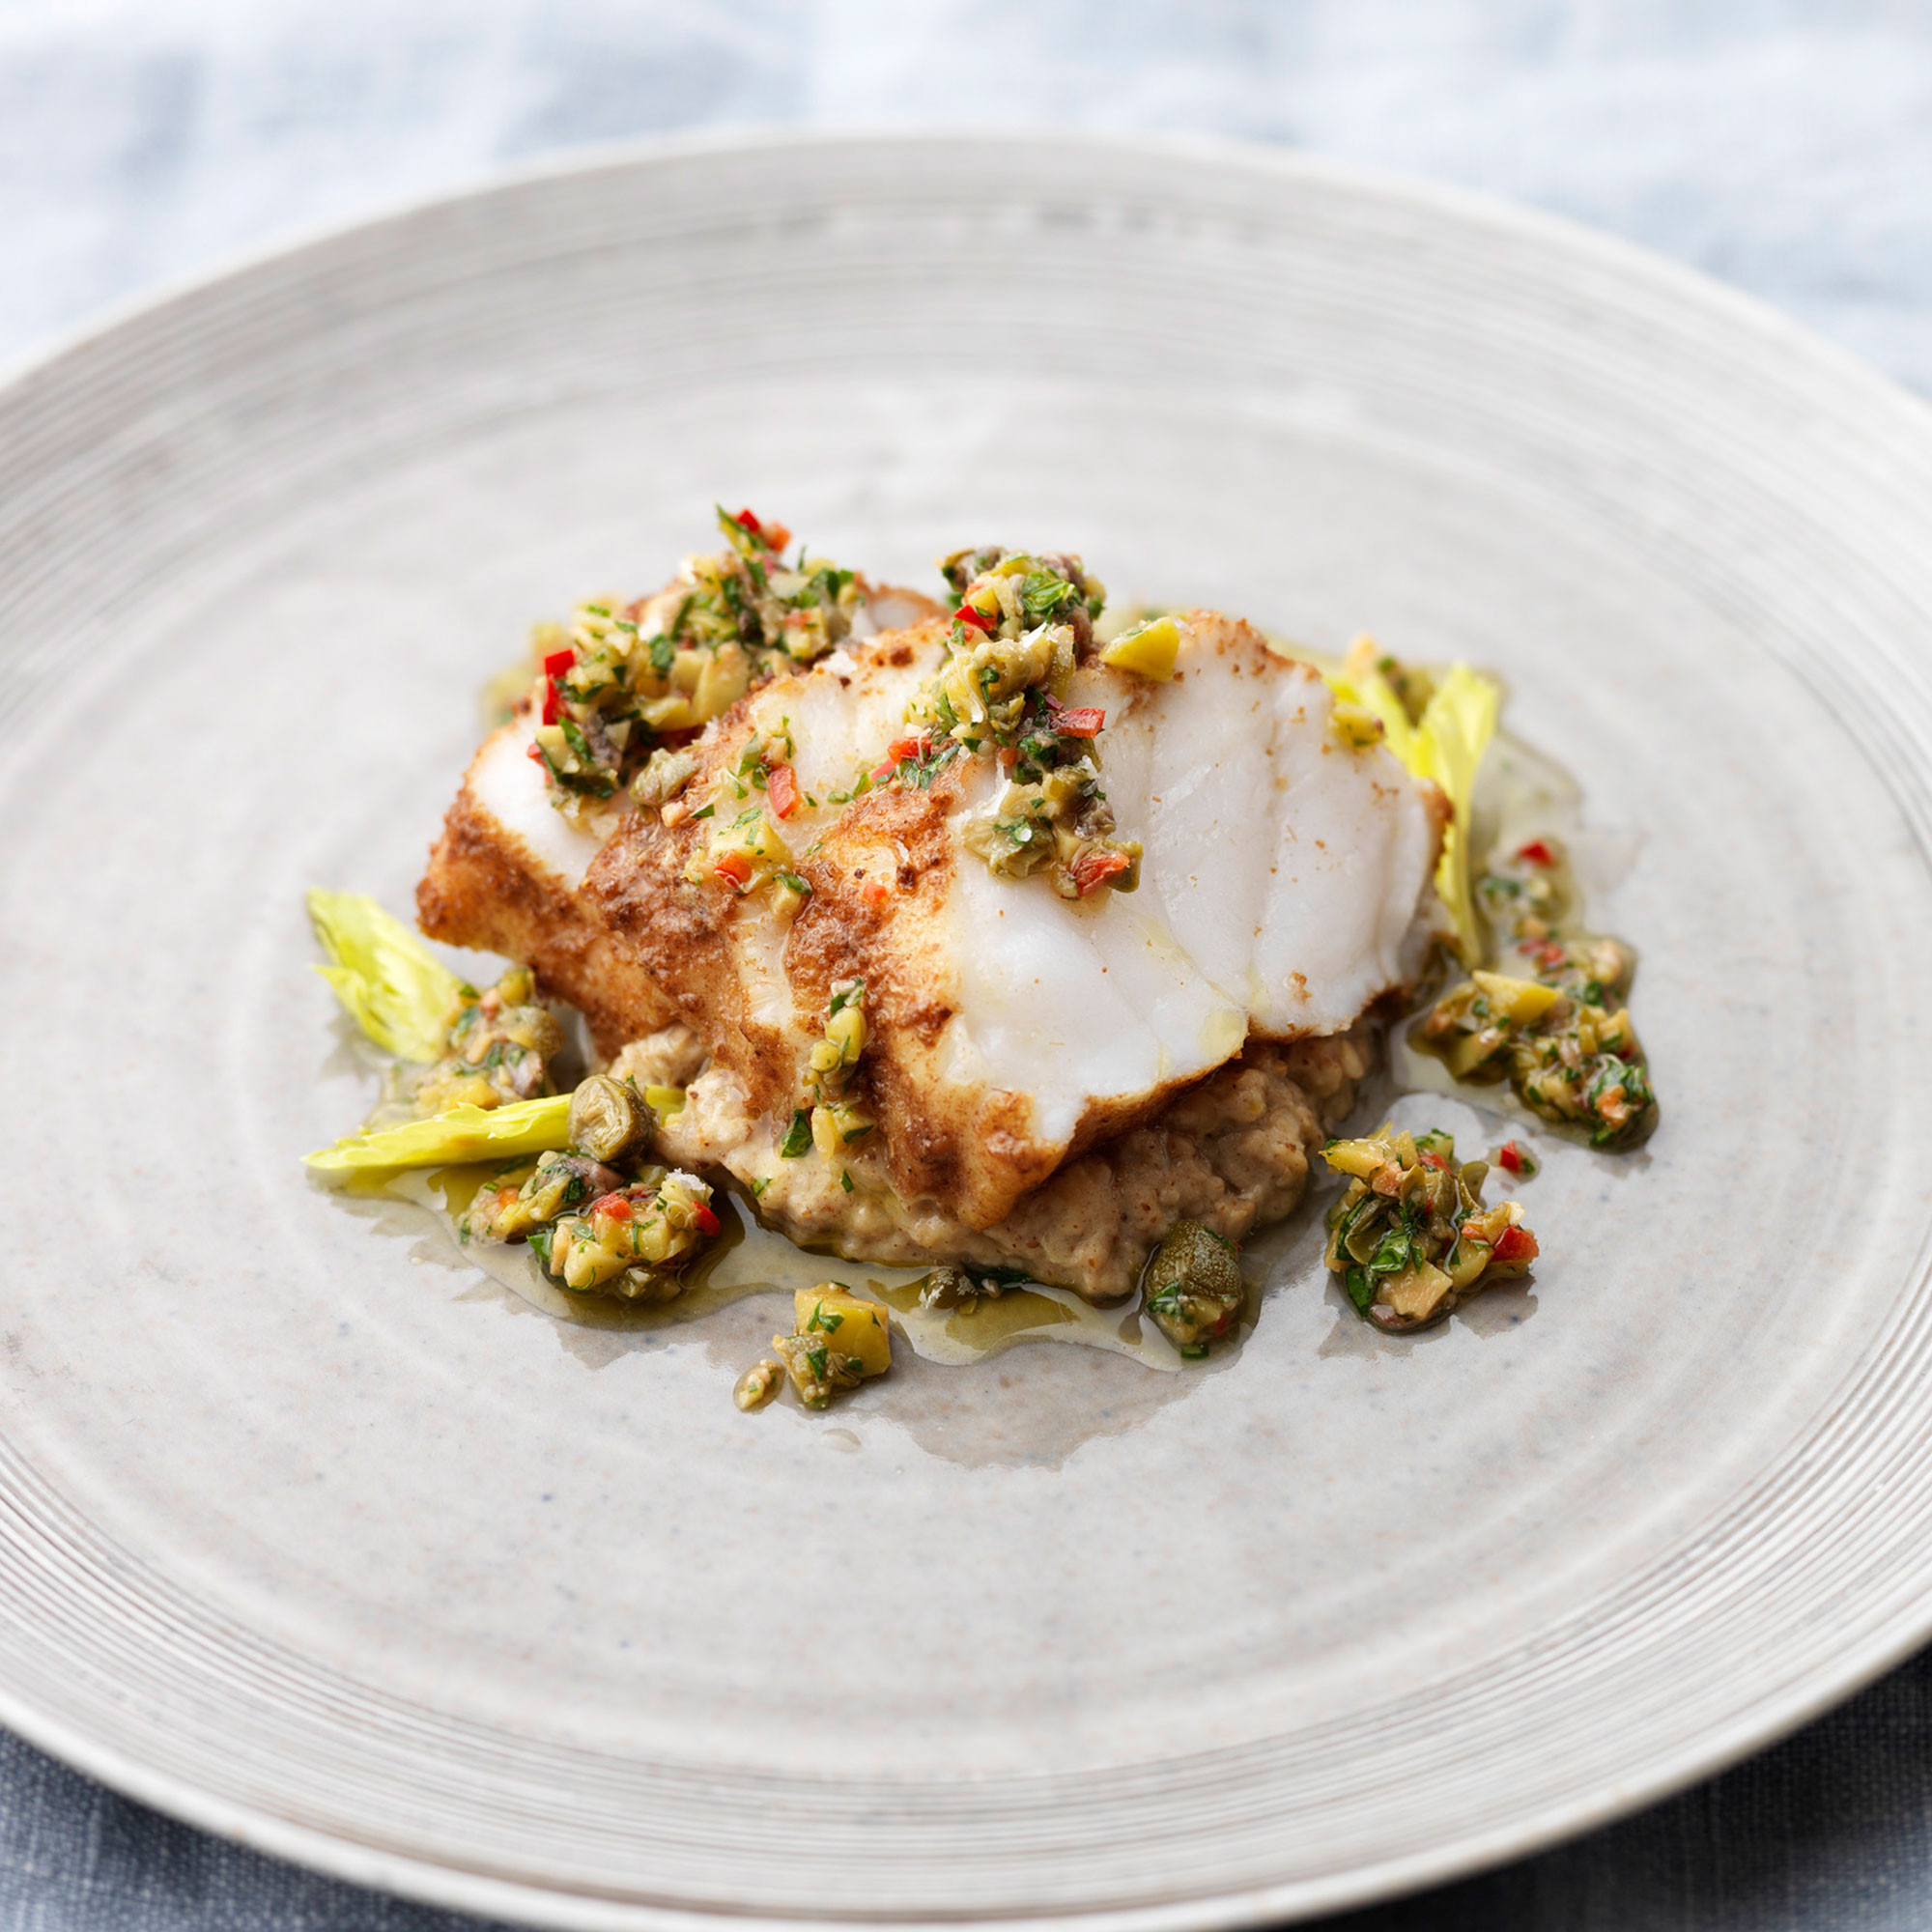 Recipes For Monk Fish
 Tom Kerridge s Spiced Monkfish And Aubergine Purée With